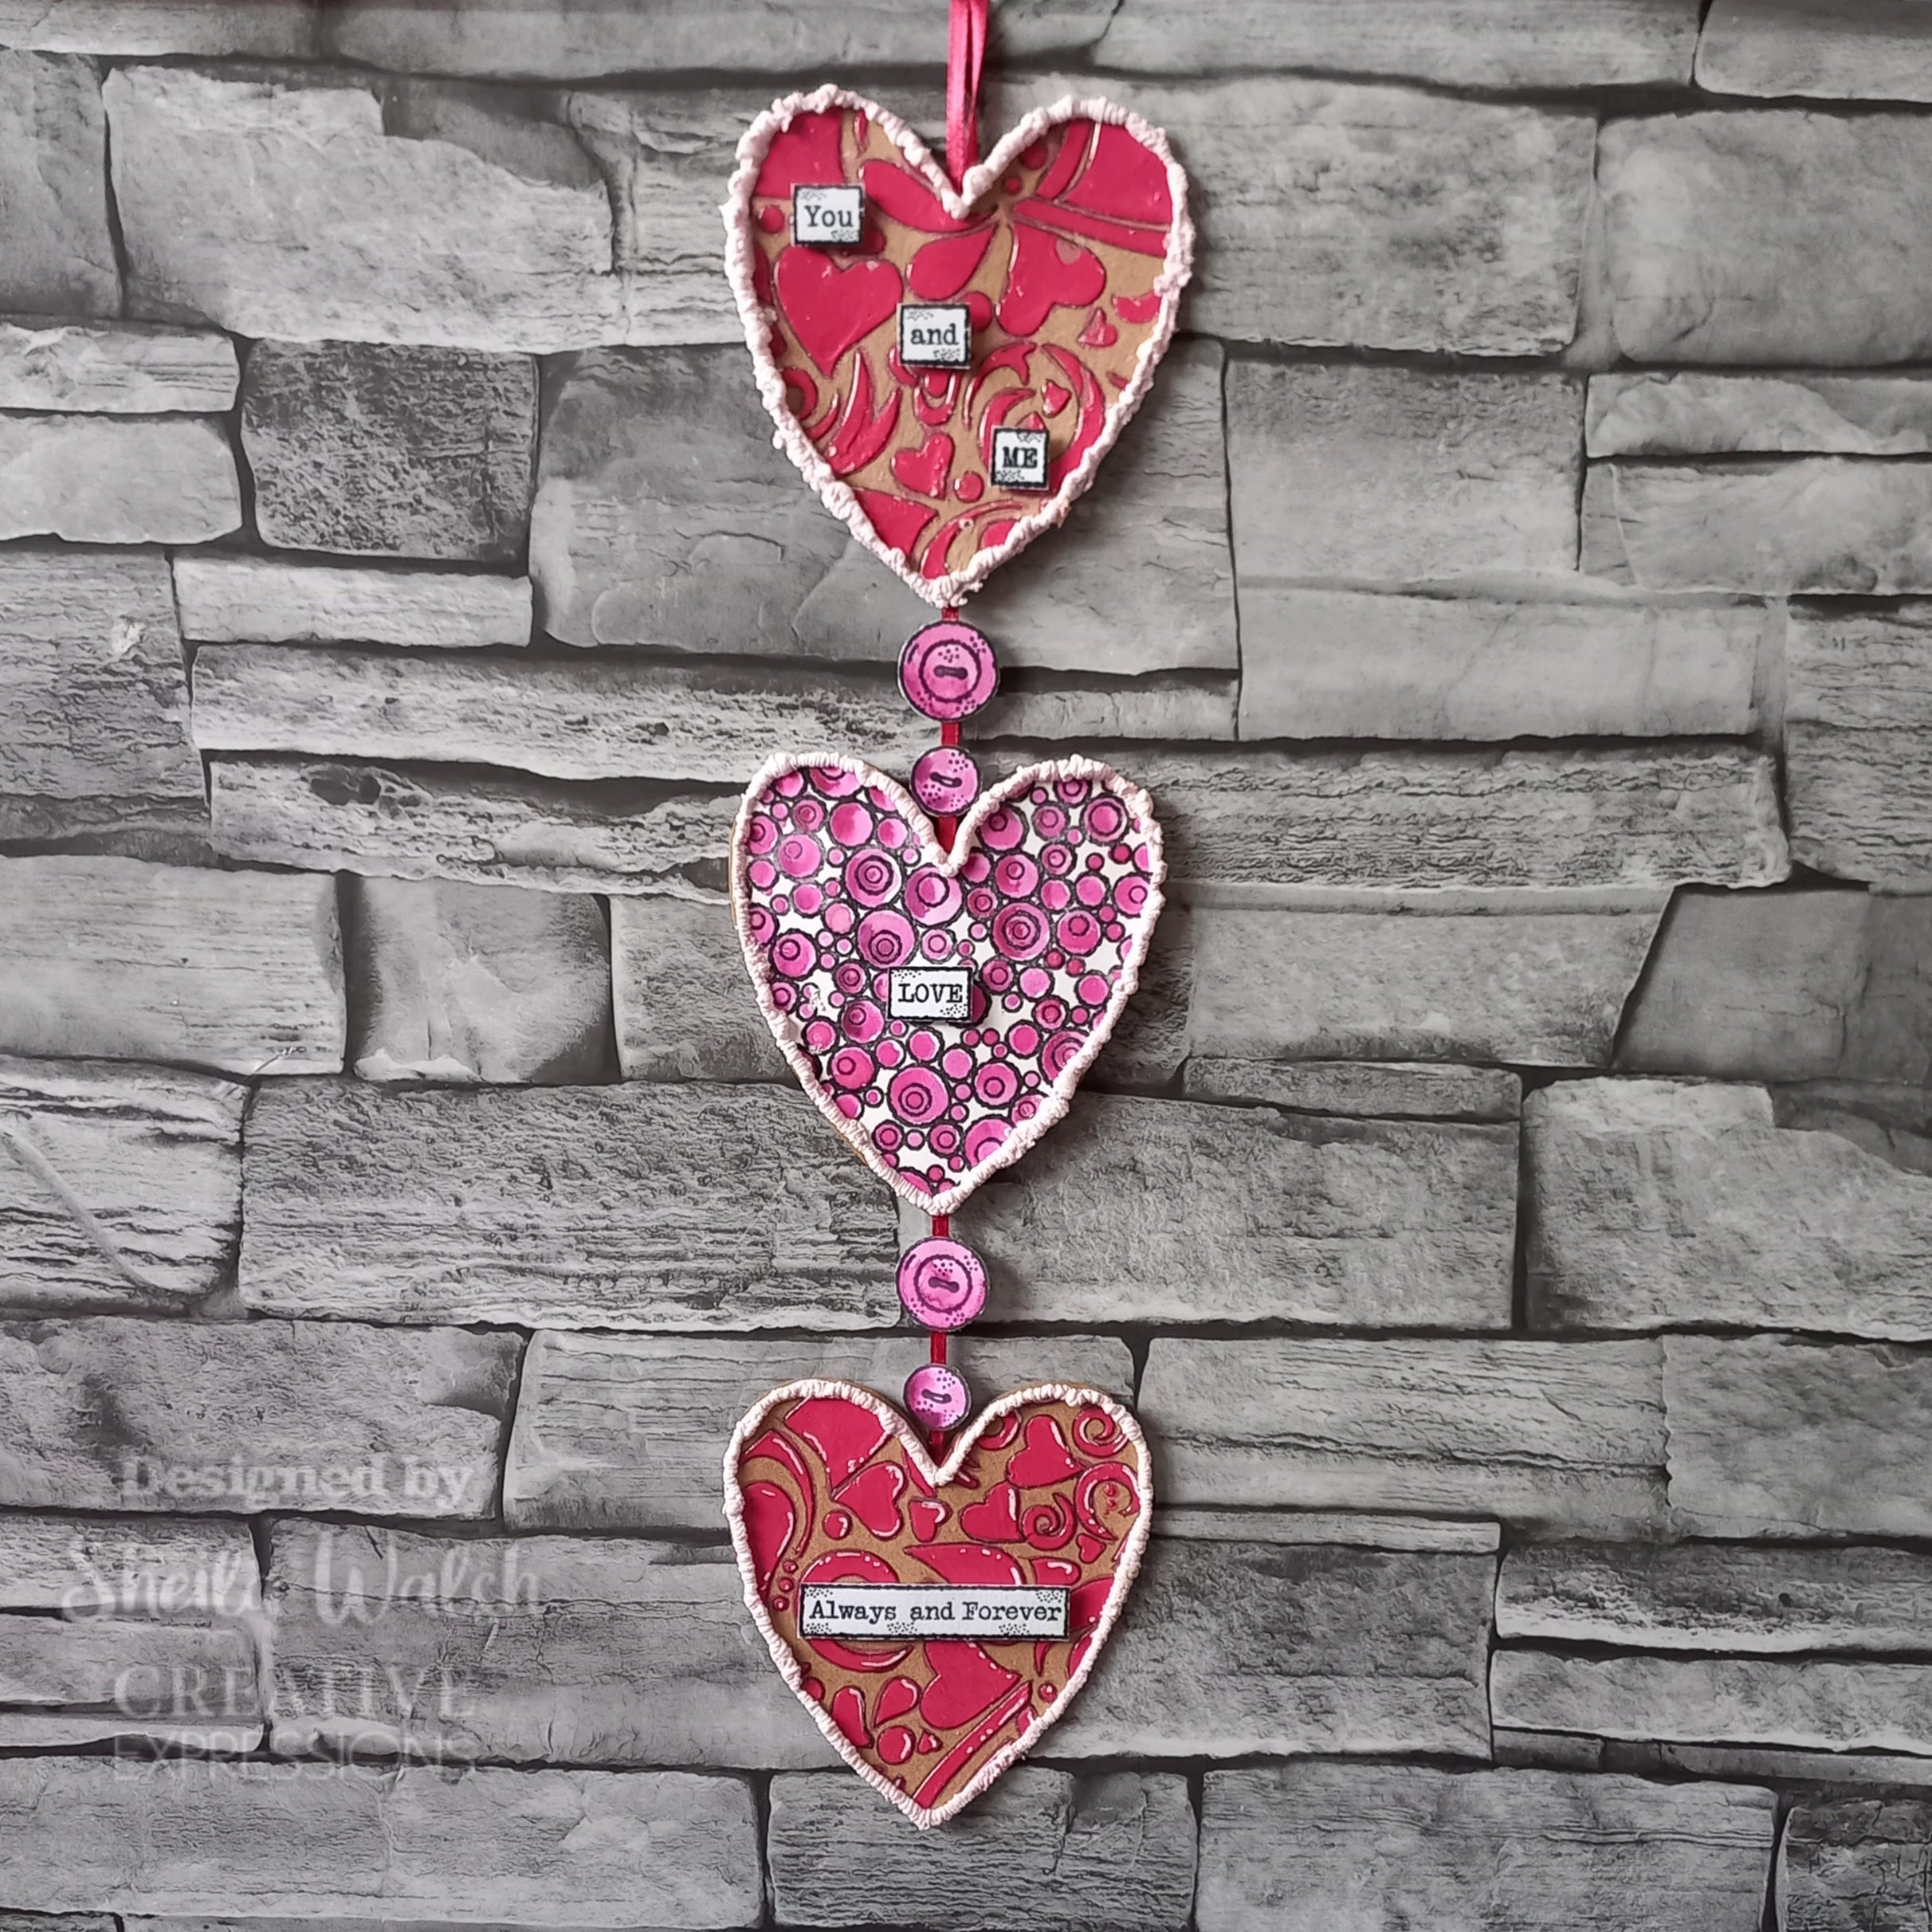 Woodware Clear Singles Bubble Heart 4 in x 6 in Stamp